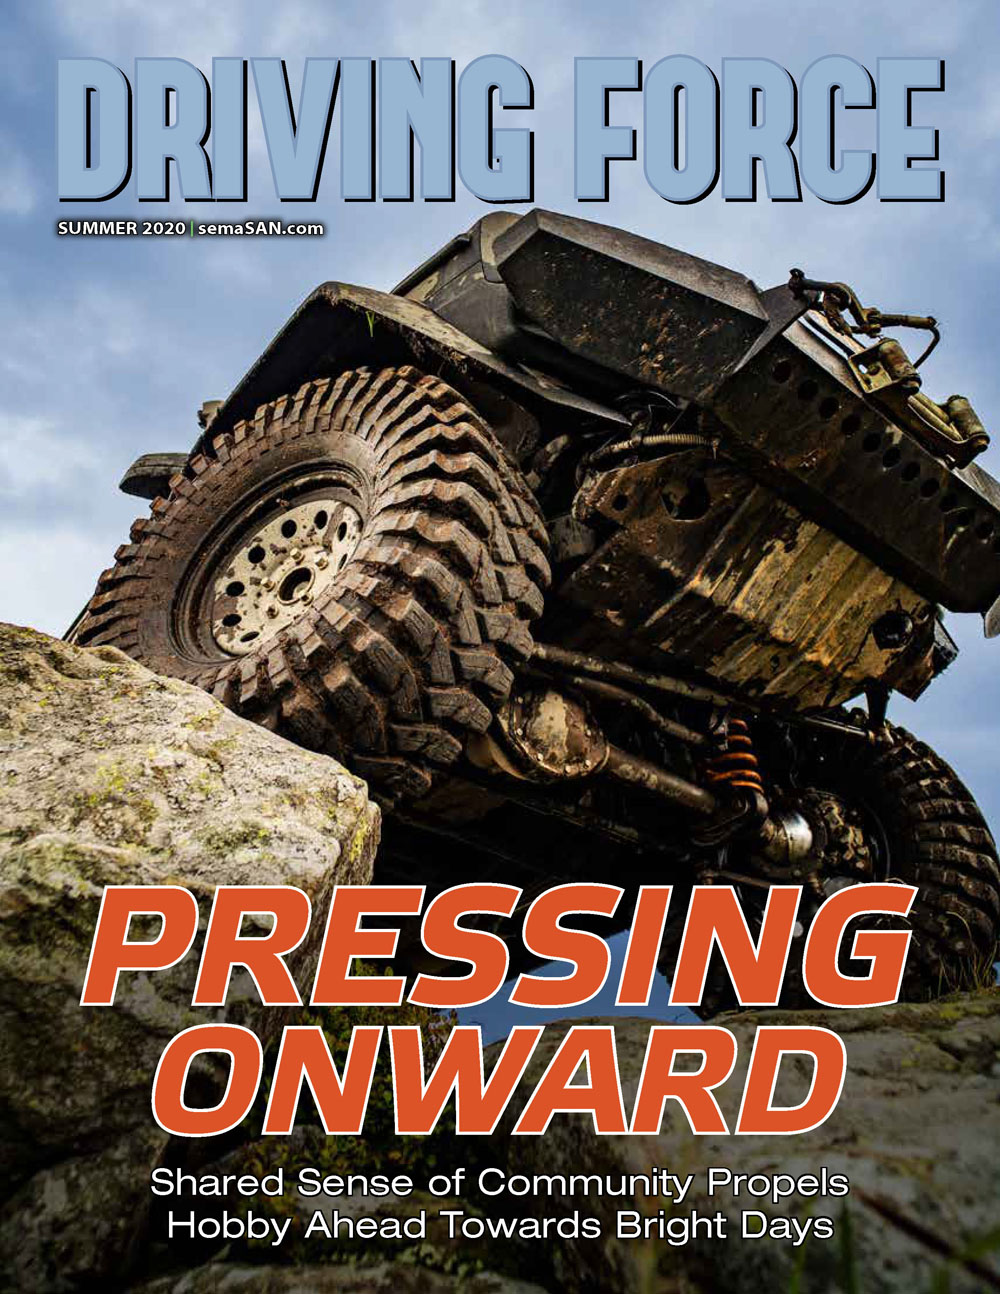 Current Issue of Driving Force, Summer 2020, SEMA Action Network